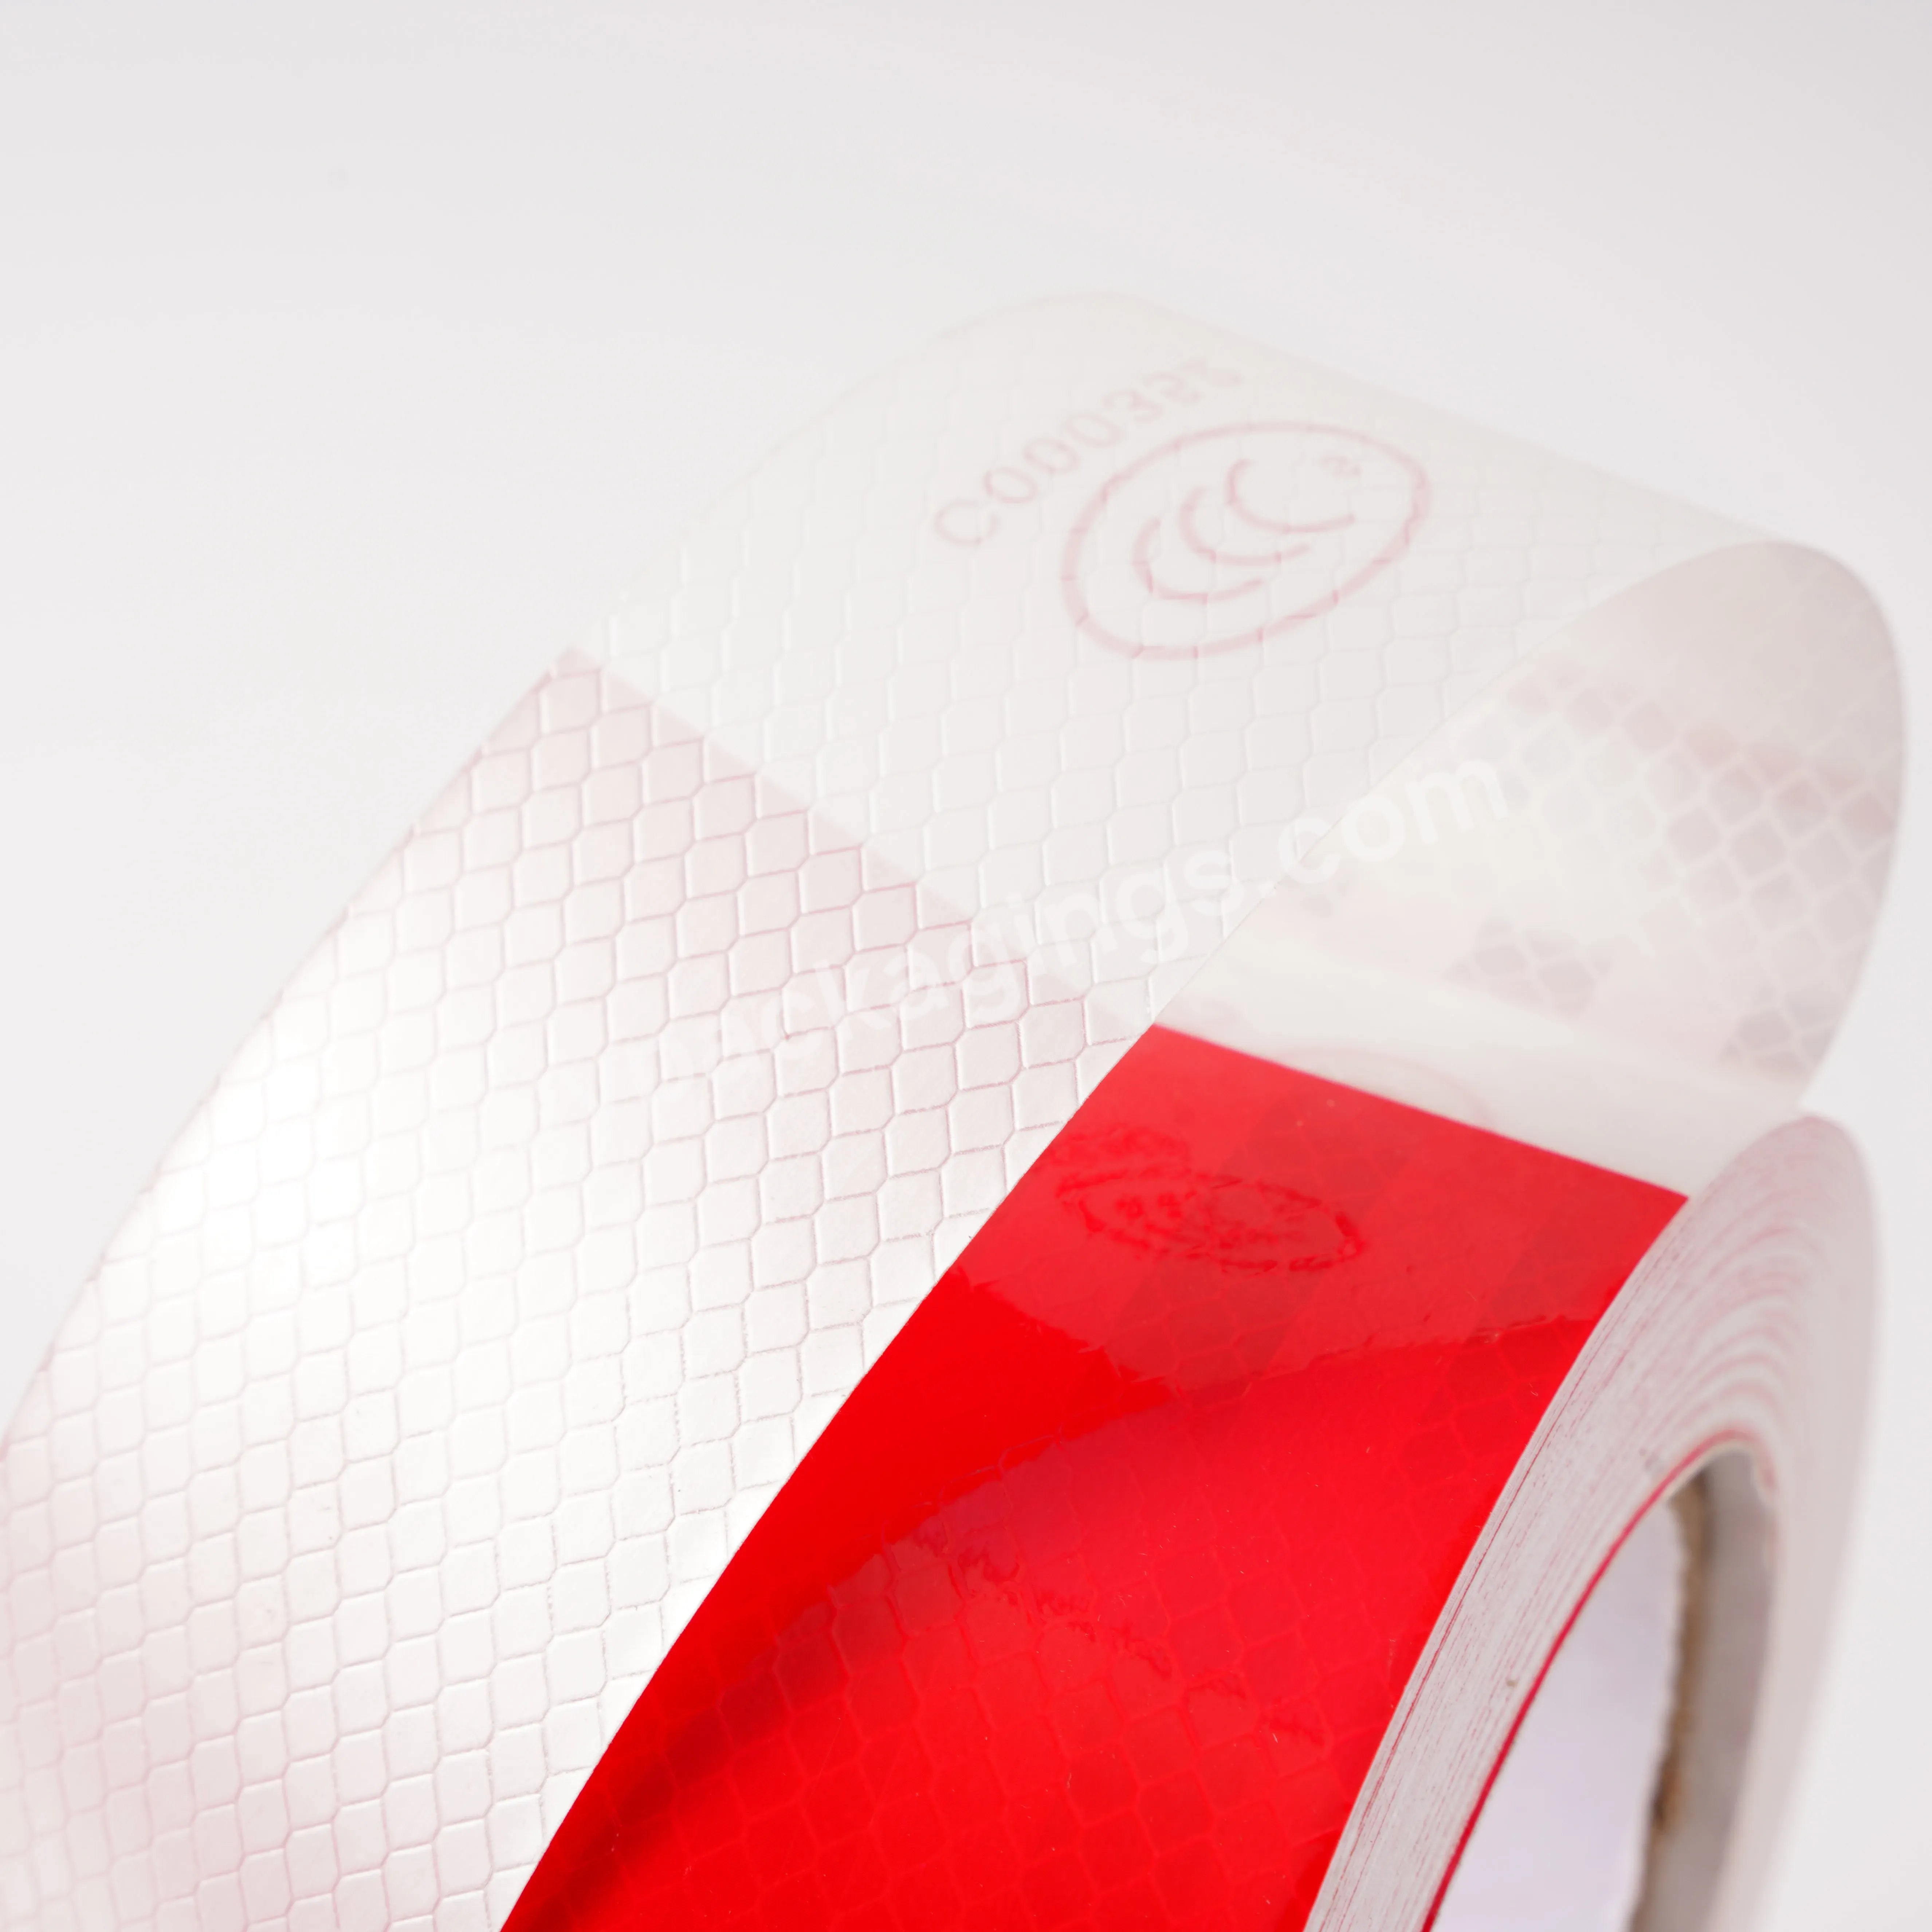 Manufacturer's Direct-sale Traffic Body Reflective Sticker Red And White Body Reflective Logo